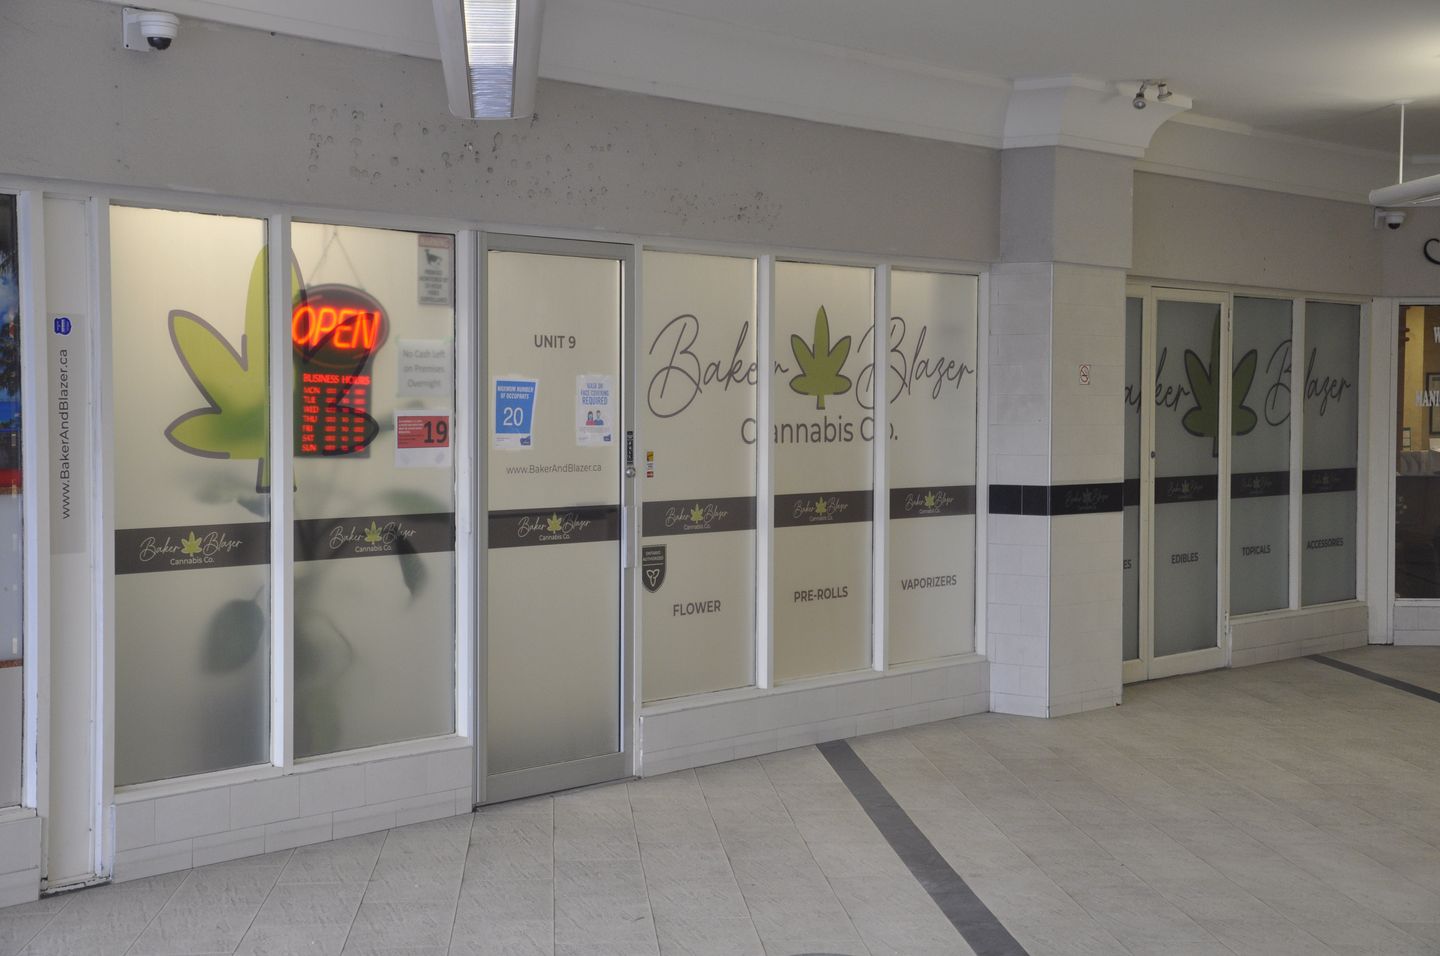 image feature Baker and Blazer Cannabis Co.